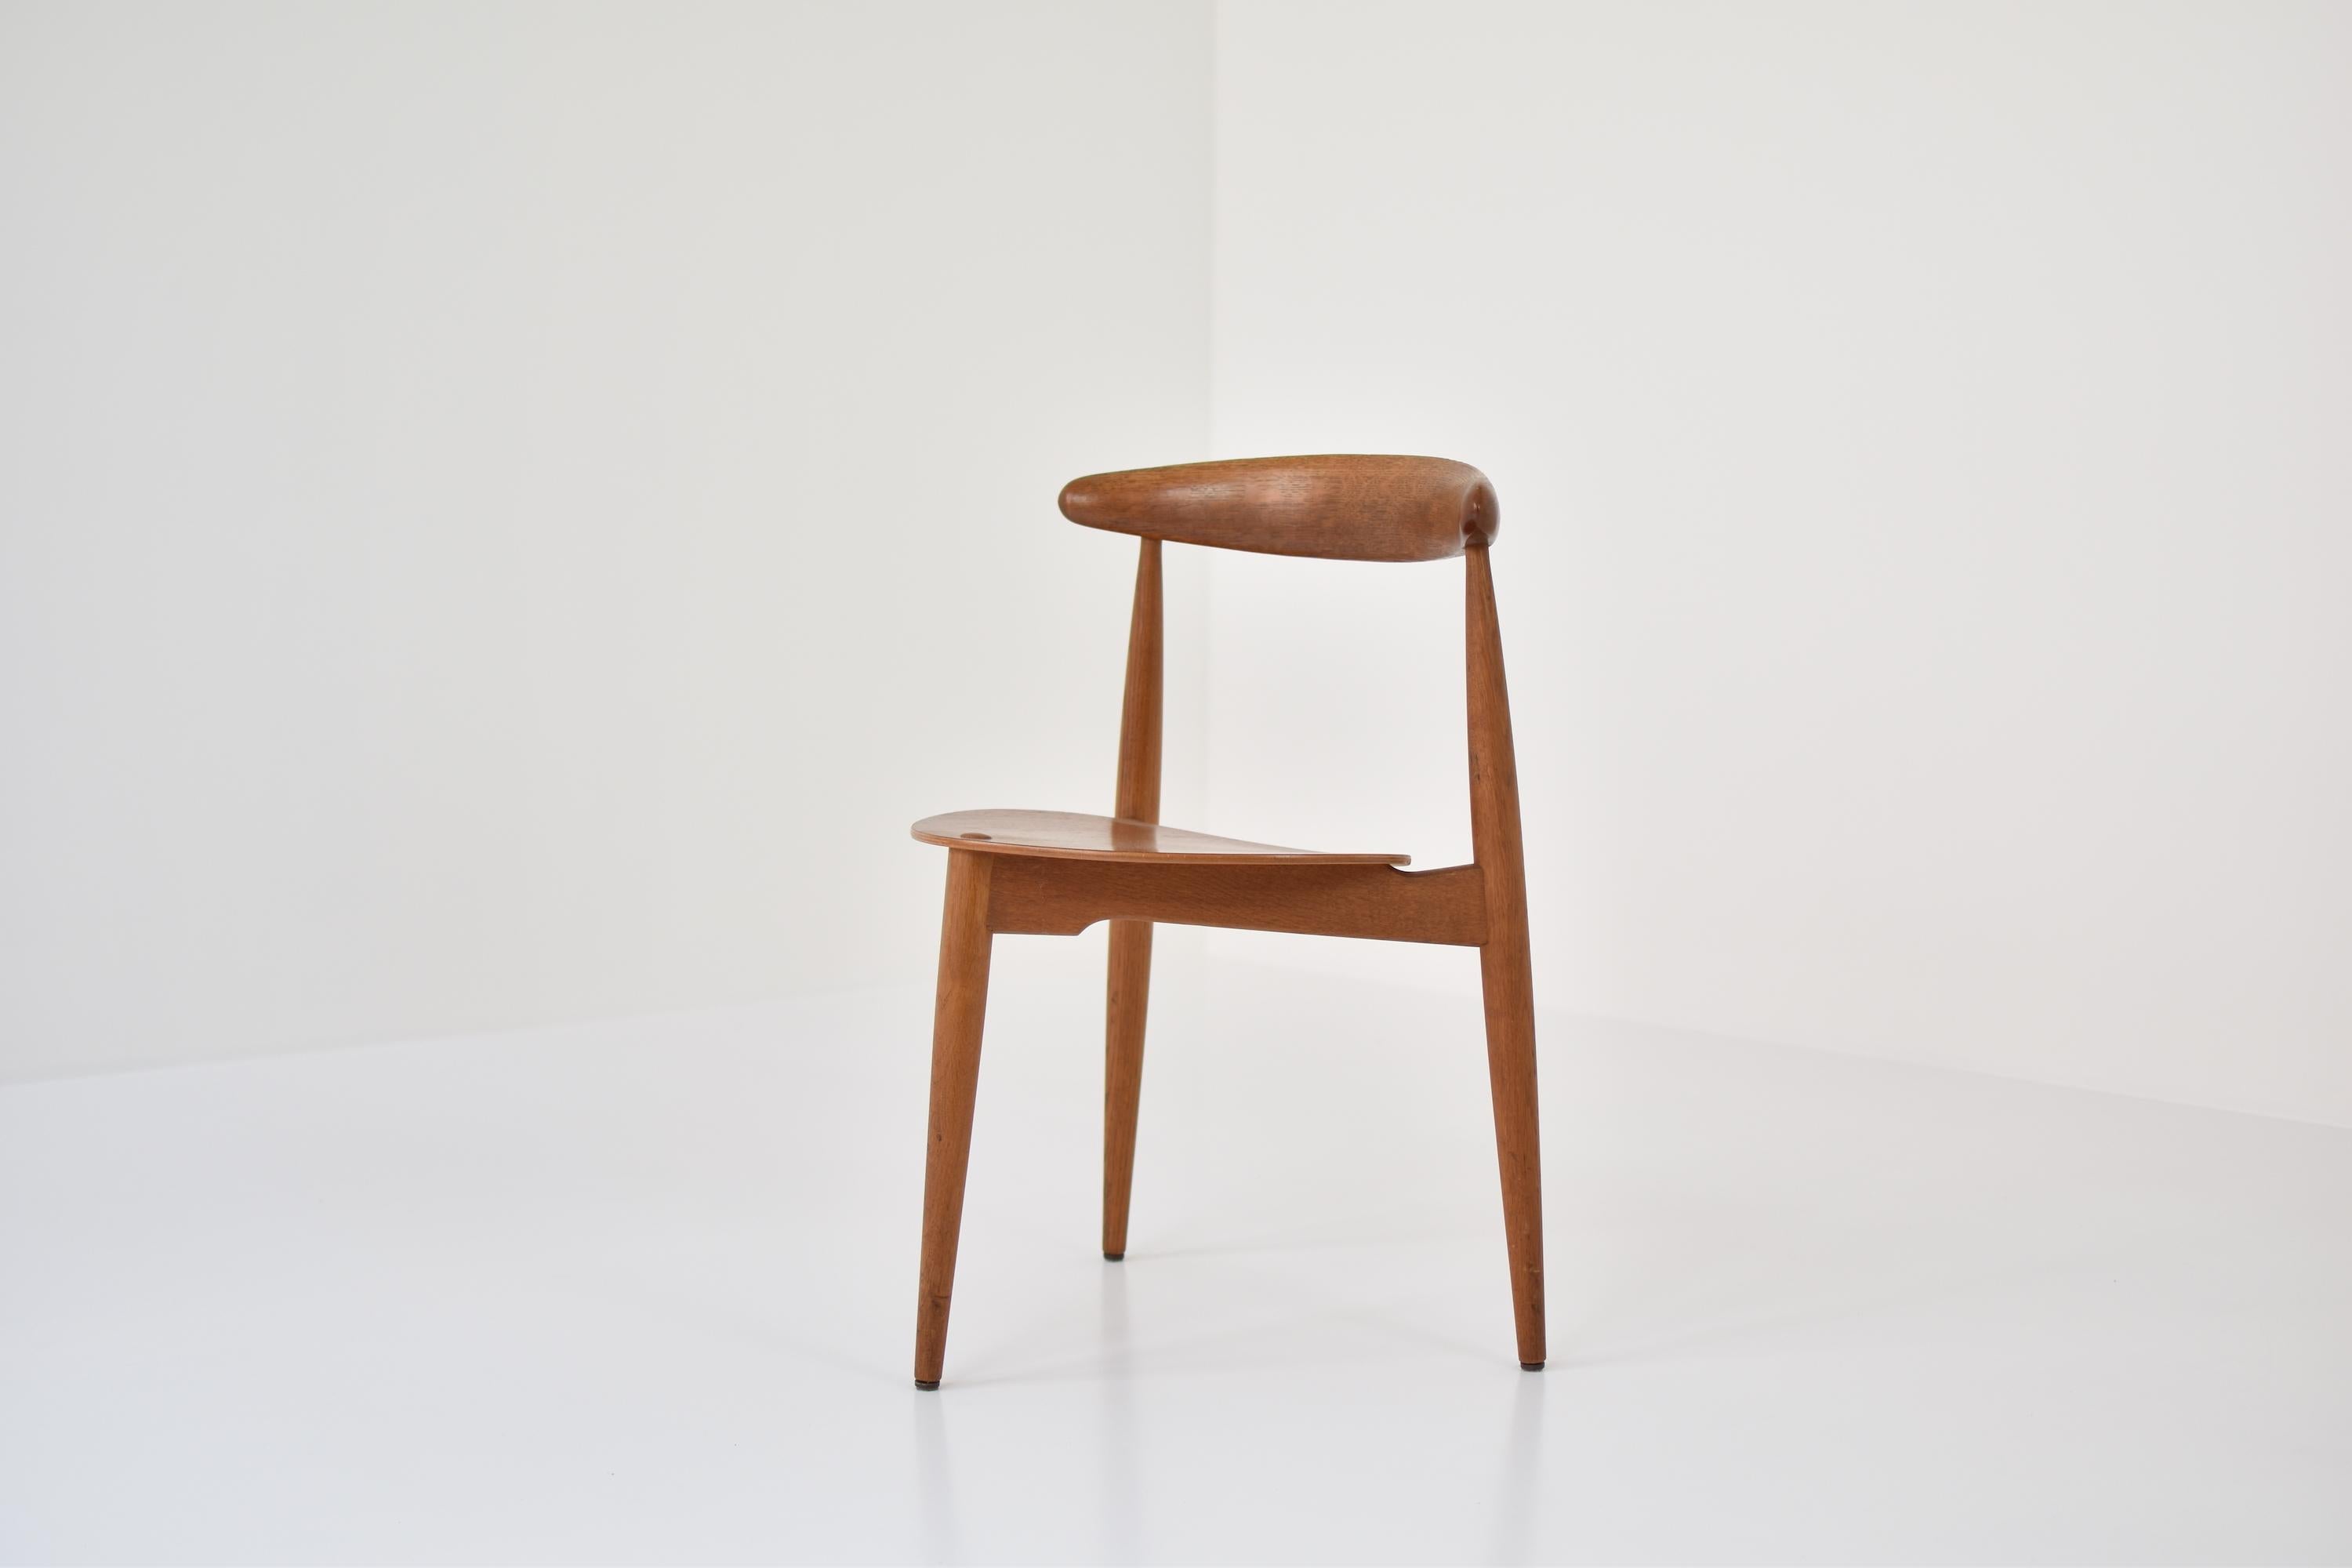 Lovely ‘Heart’ side chair designed by Hans J. Wegner and produced by Fritz Hansen, Denmark, 1952. This architectural piece of art has a tripod base and a seating made out of teak finished with a solid backrest. This is model FH 4103, also called the